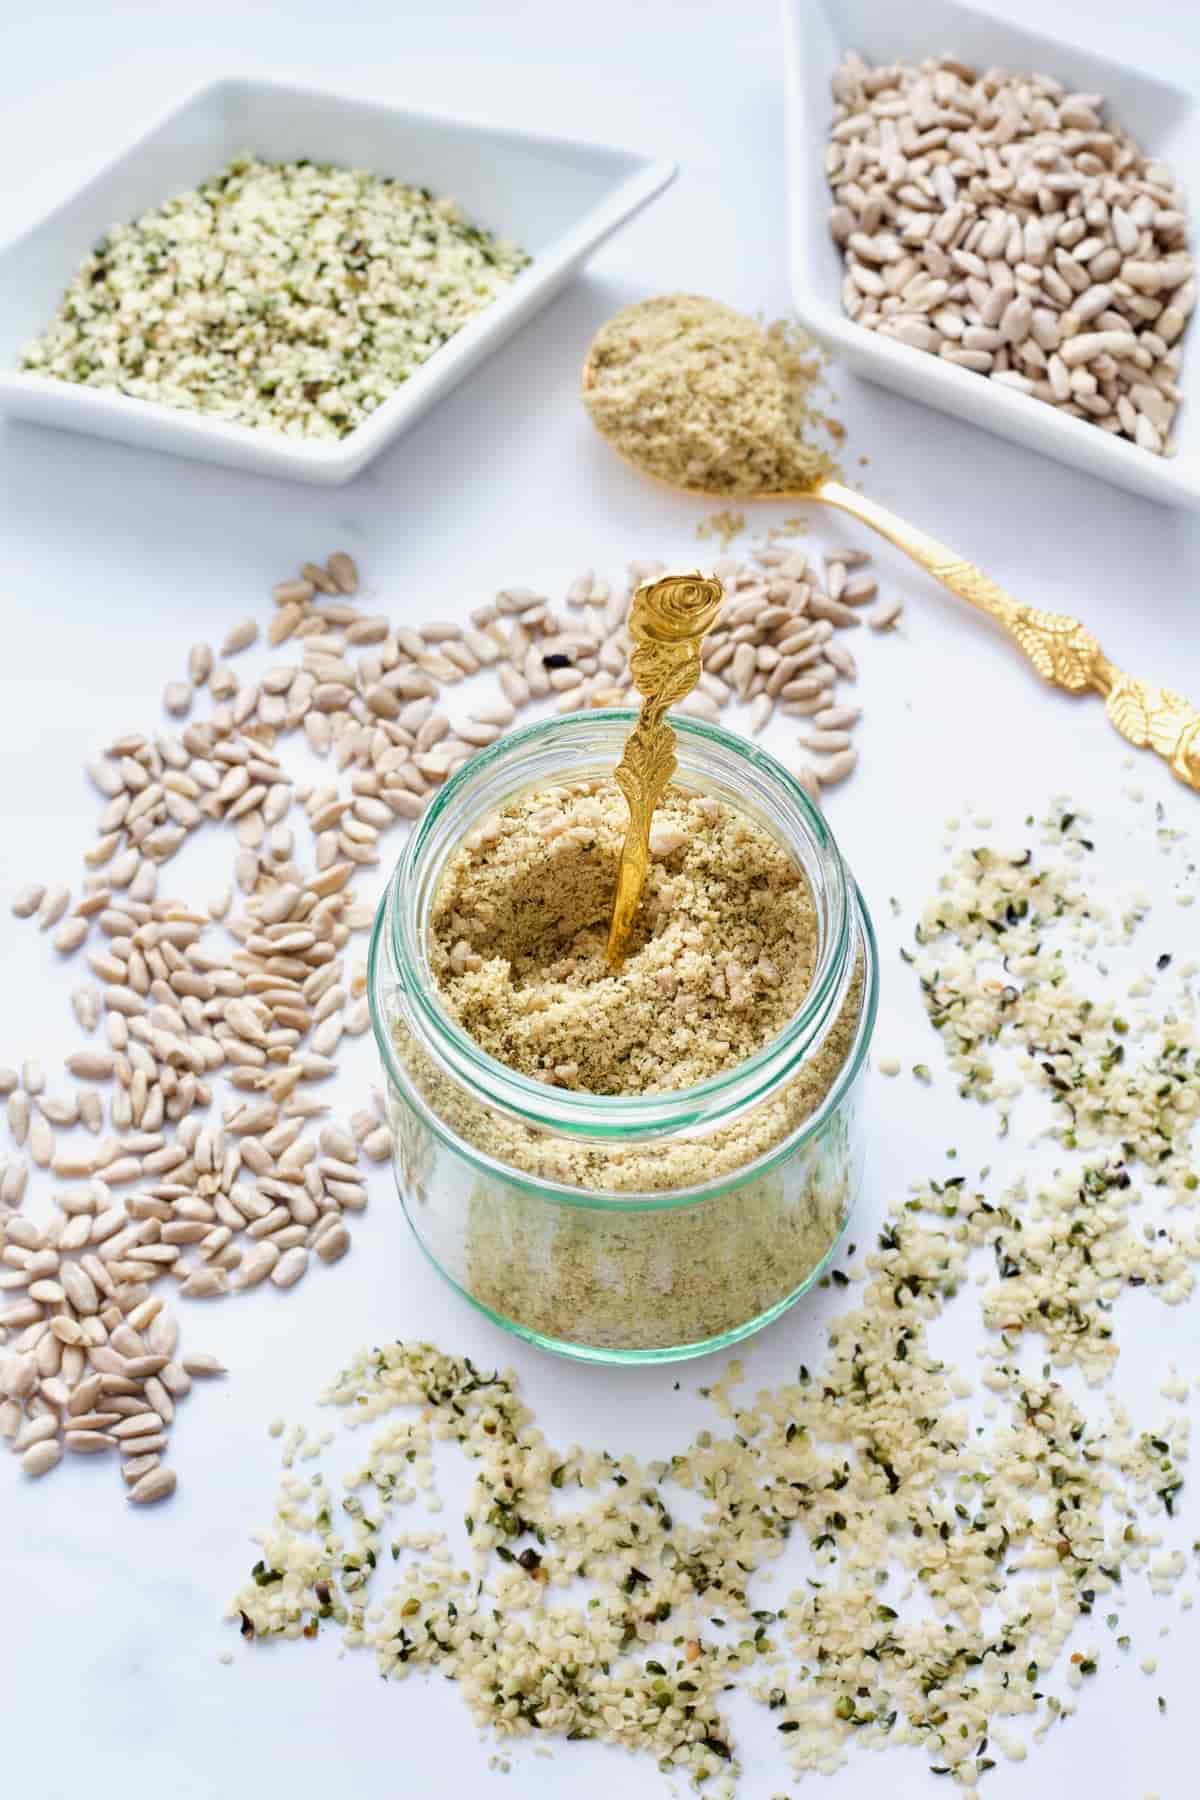 Jar with vegan parmesan, scattered seeds and seeds in dishes.